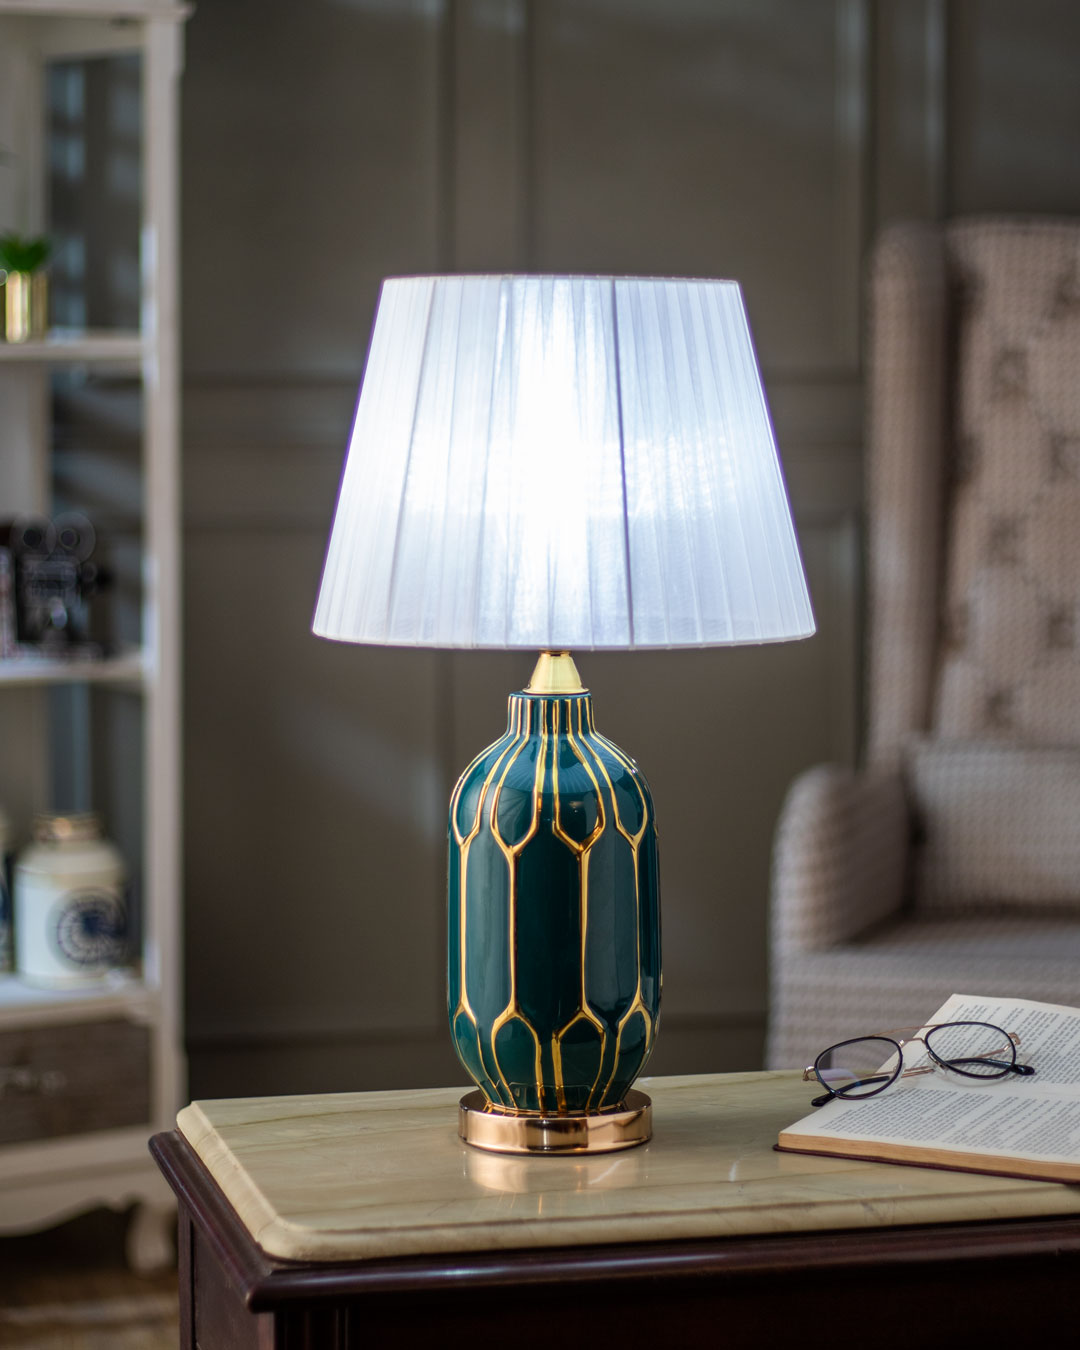 Asteria Porcelain Table Lamp - Green